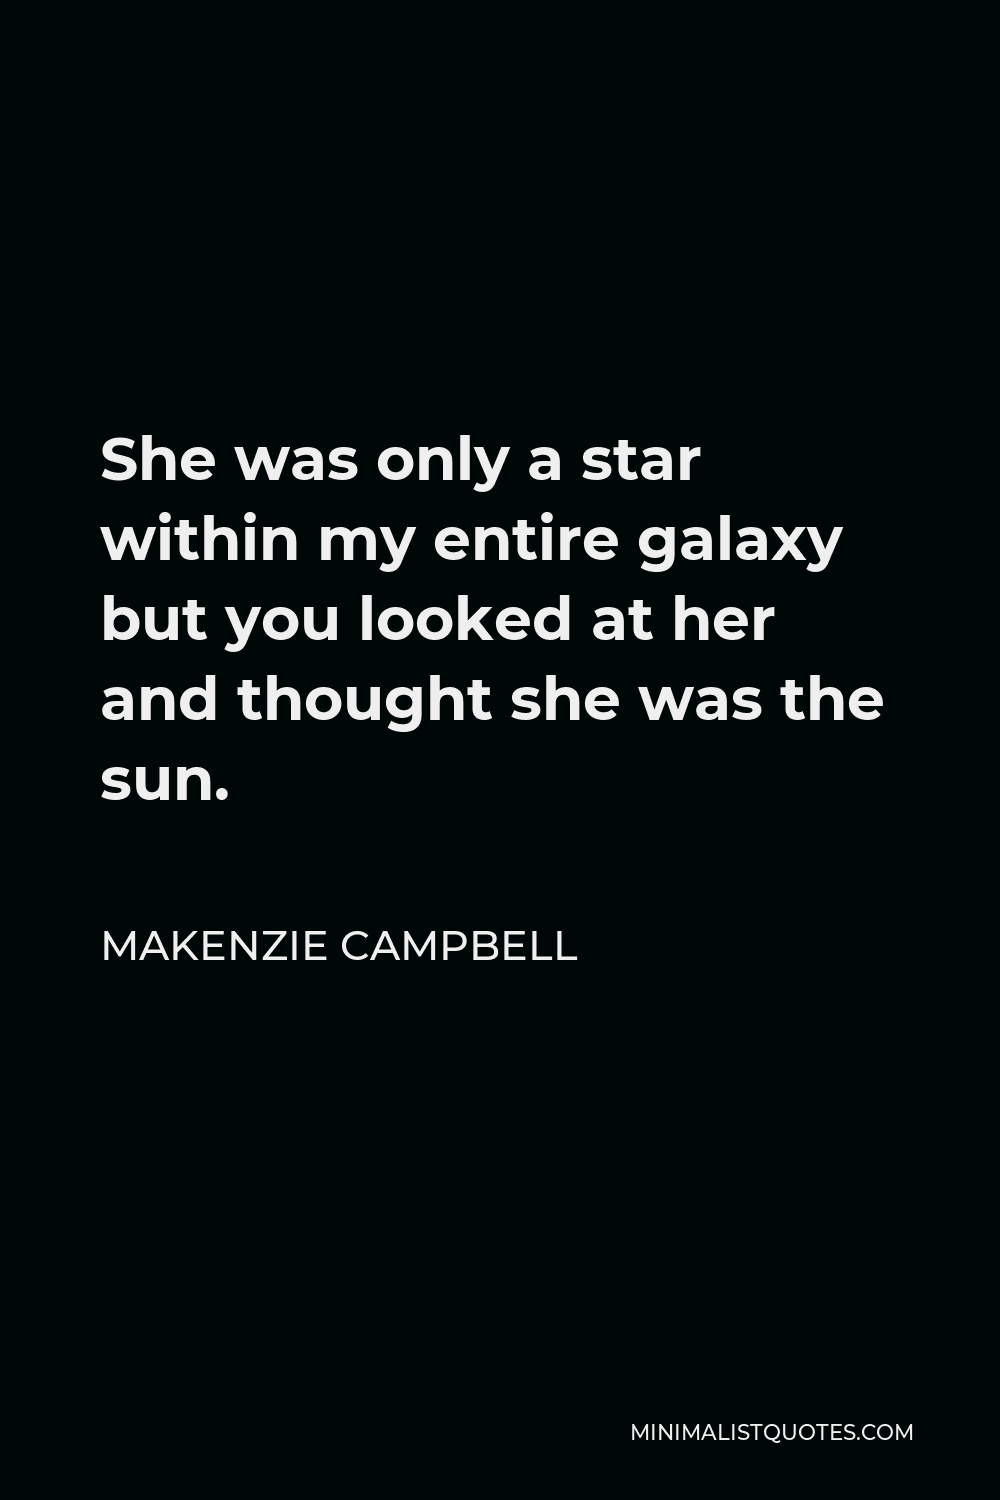 Makenzie Campbell Quote - She was only a star within my entire galaxy but you looked at her and thought she was the sun.